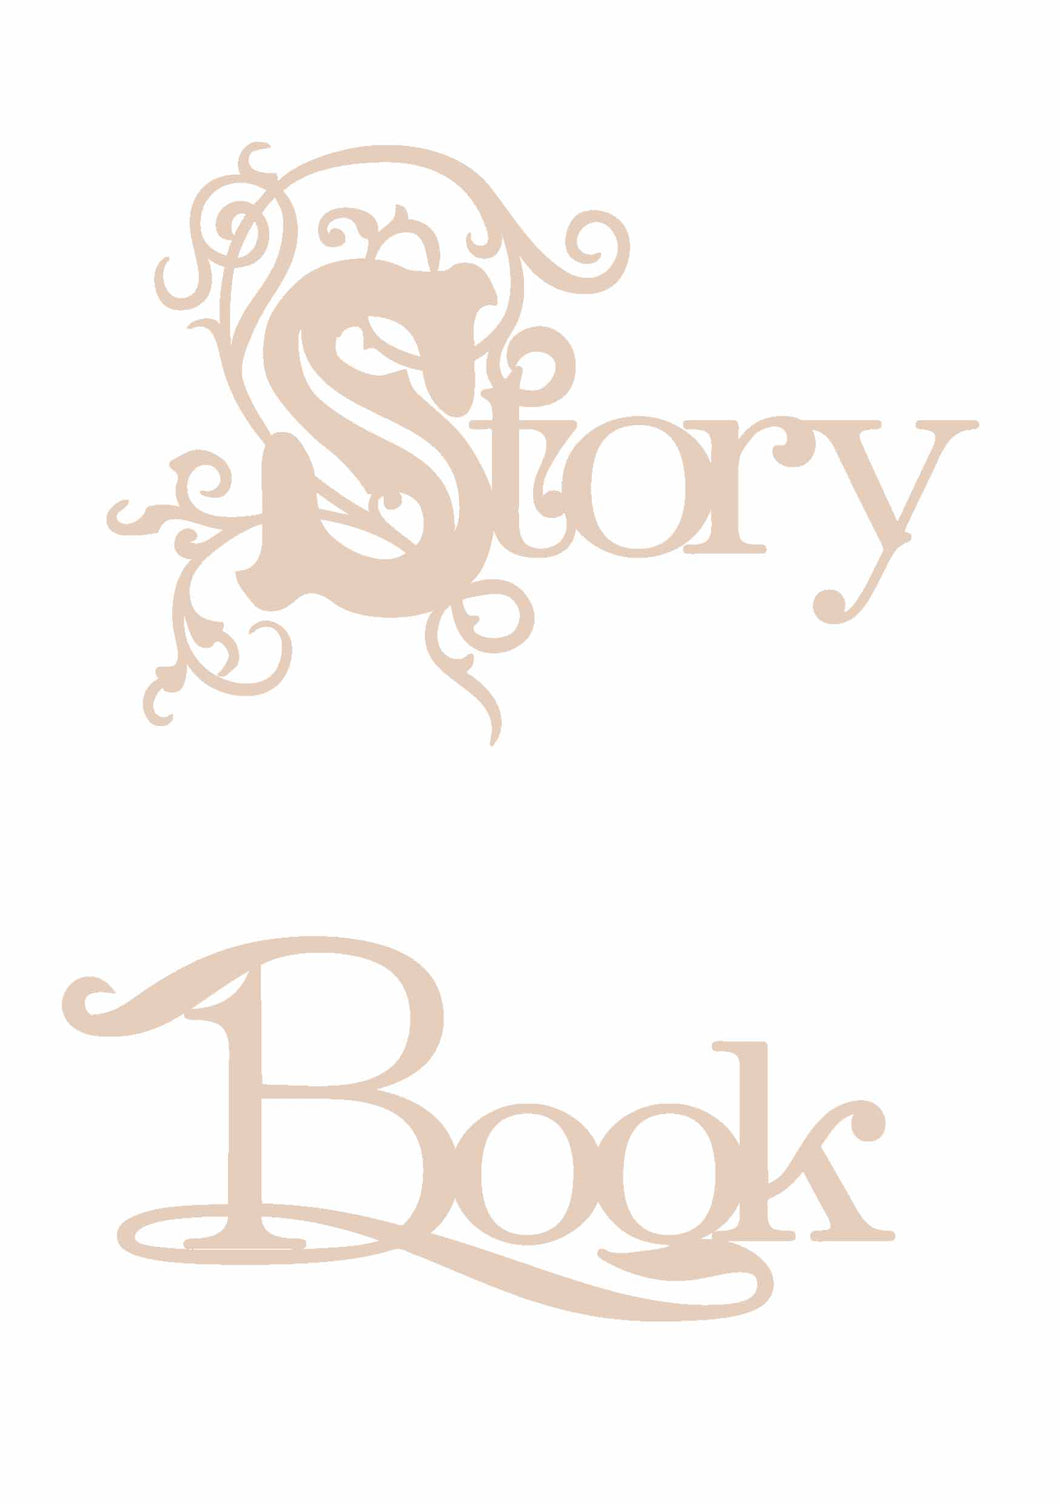 Story Book (Text)